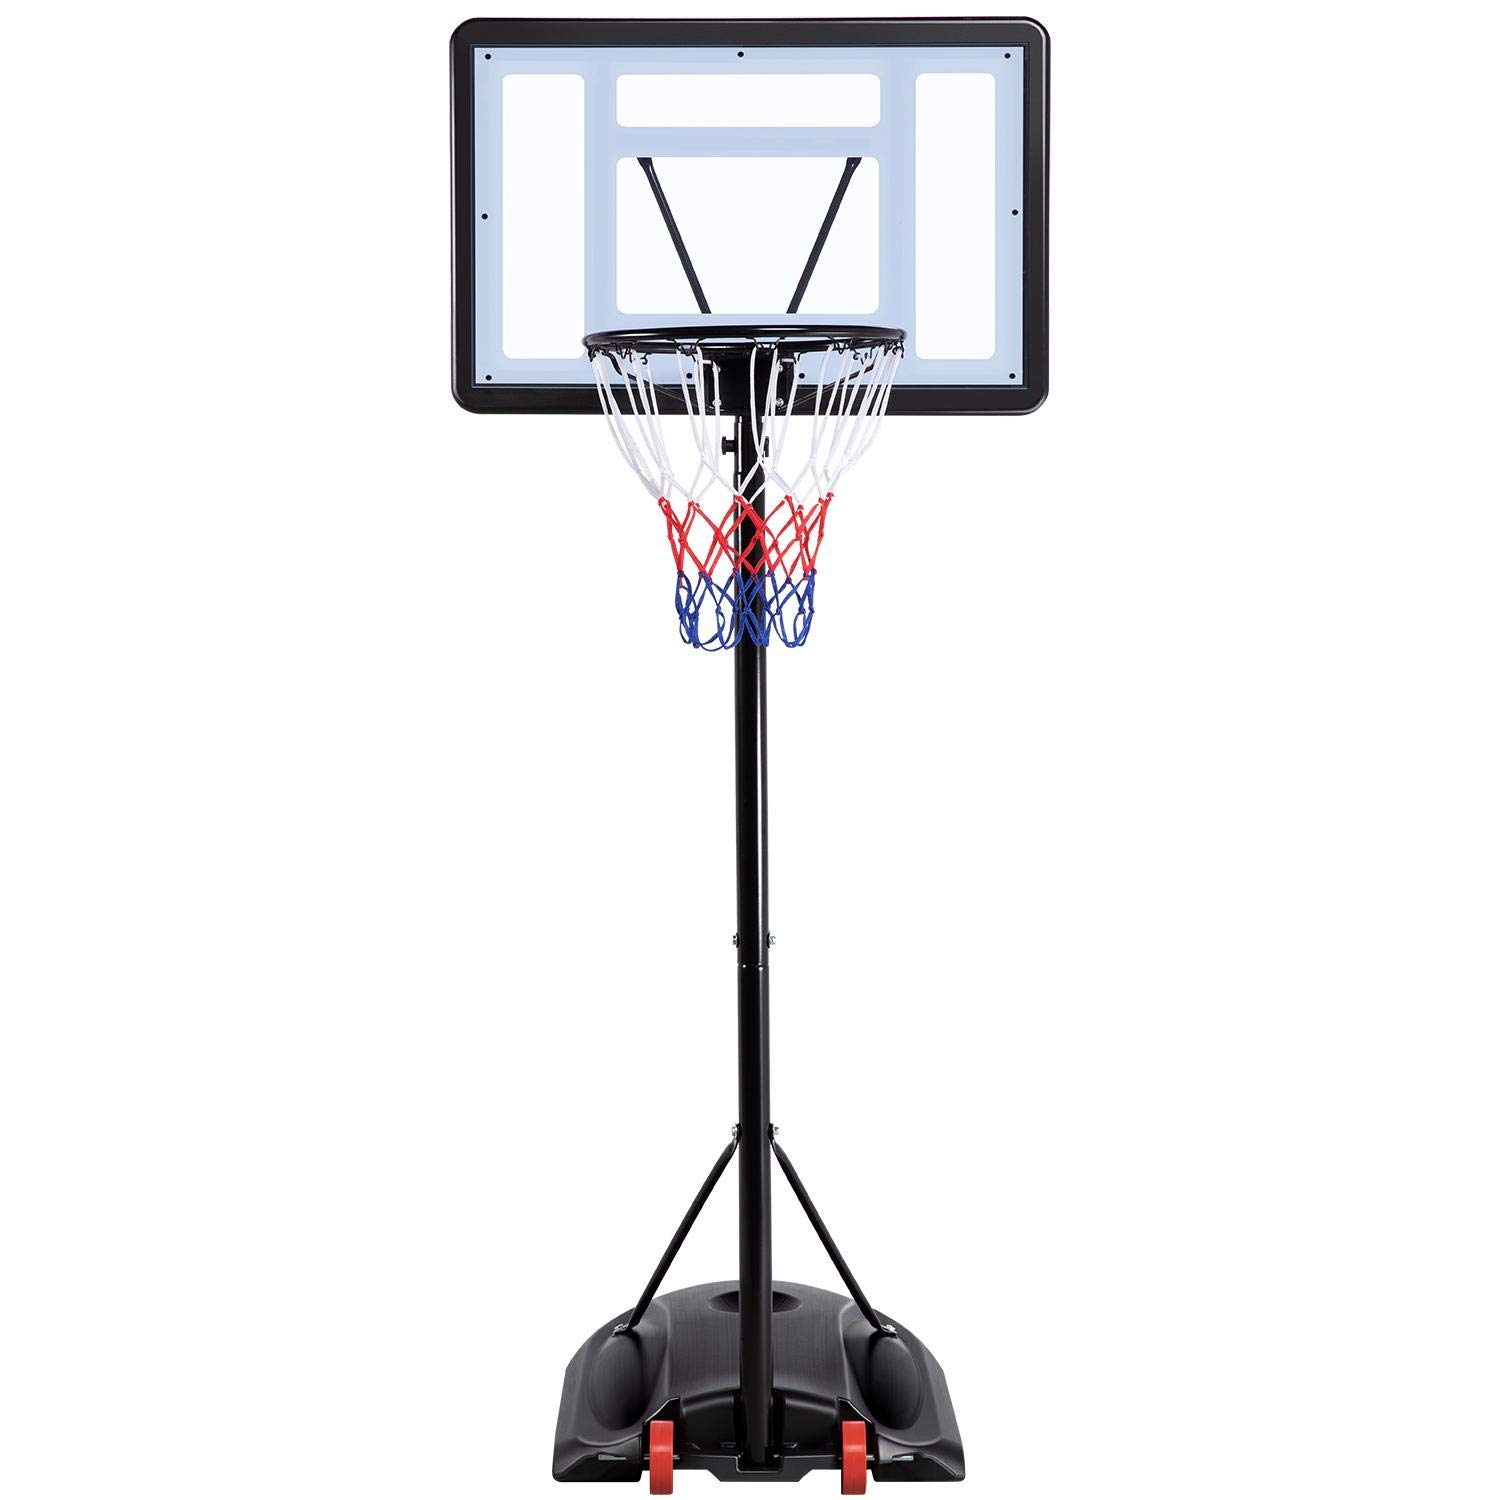 Yaheetech 7.2-9.2ft Basketball Hoop Backboard System Portable Removeable Basketball Hoop & Goals Outdoor/Indoor Adjustable Height Basketball Set for Youth